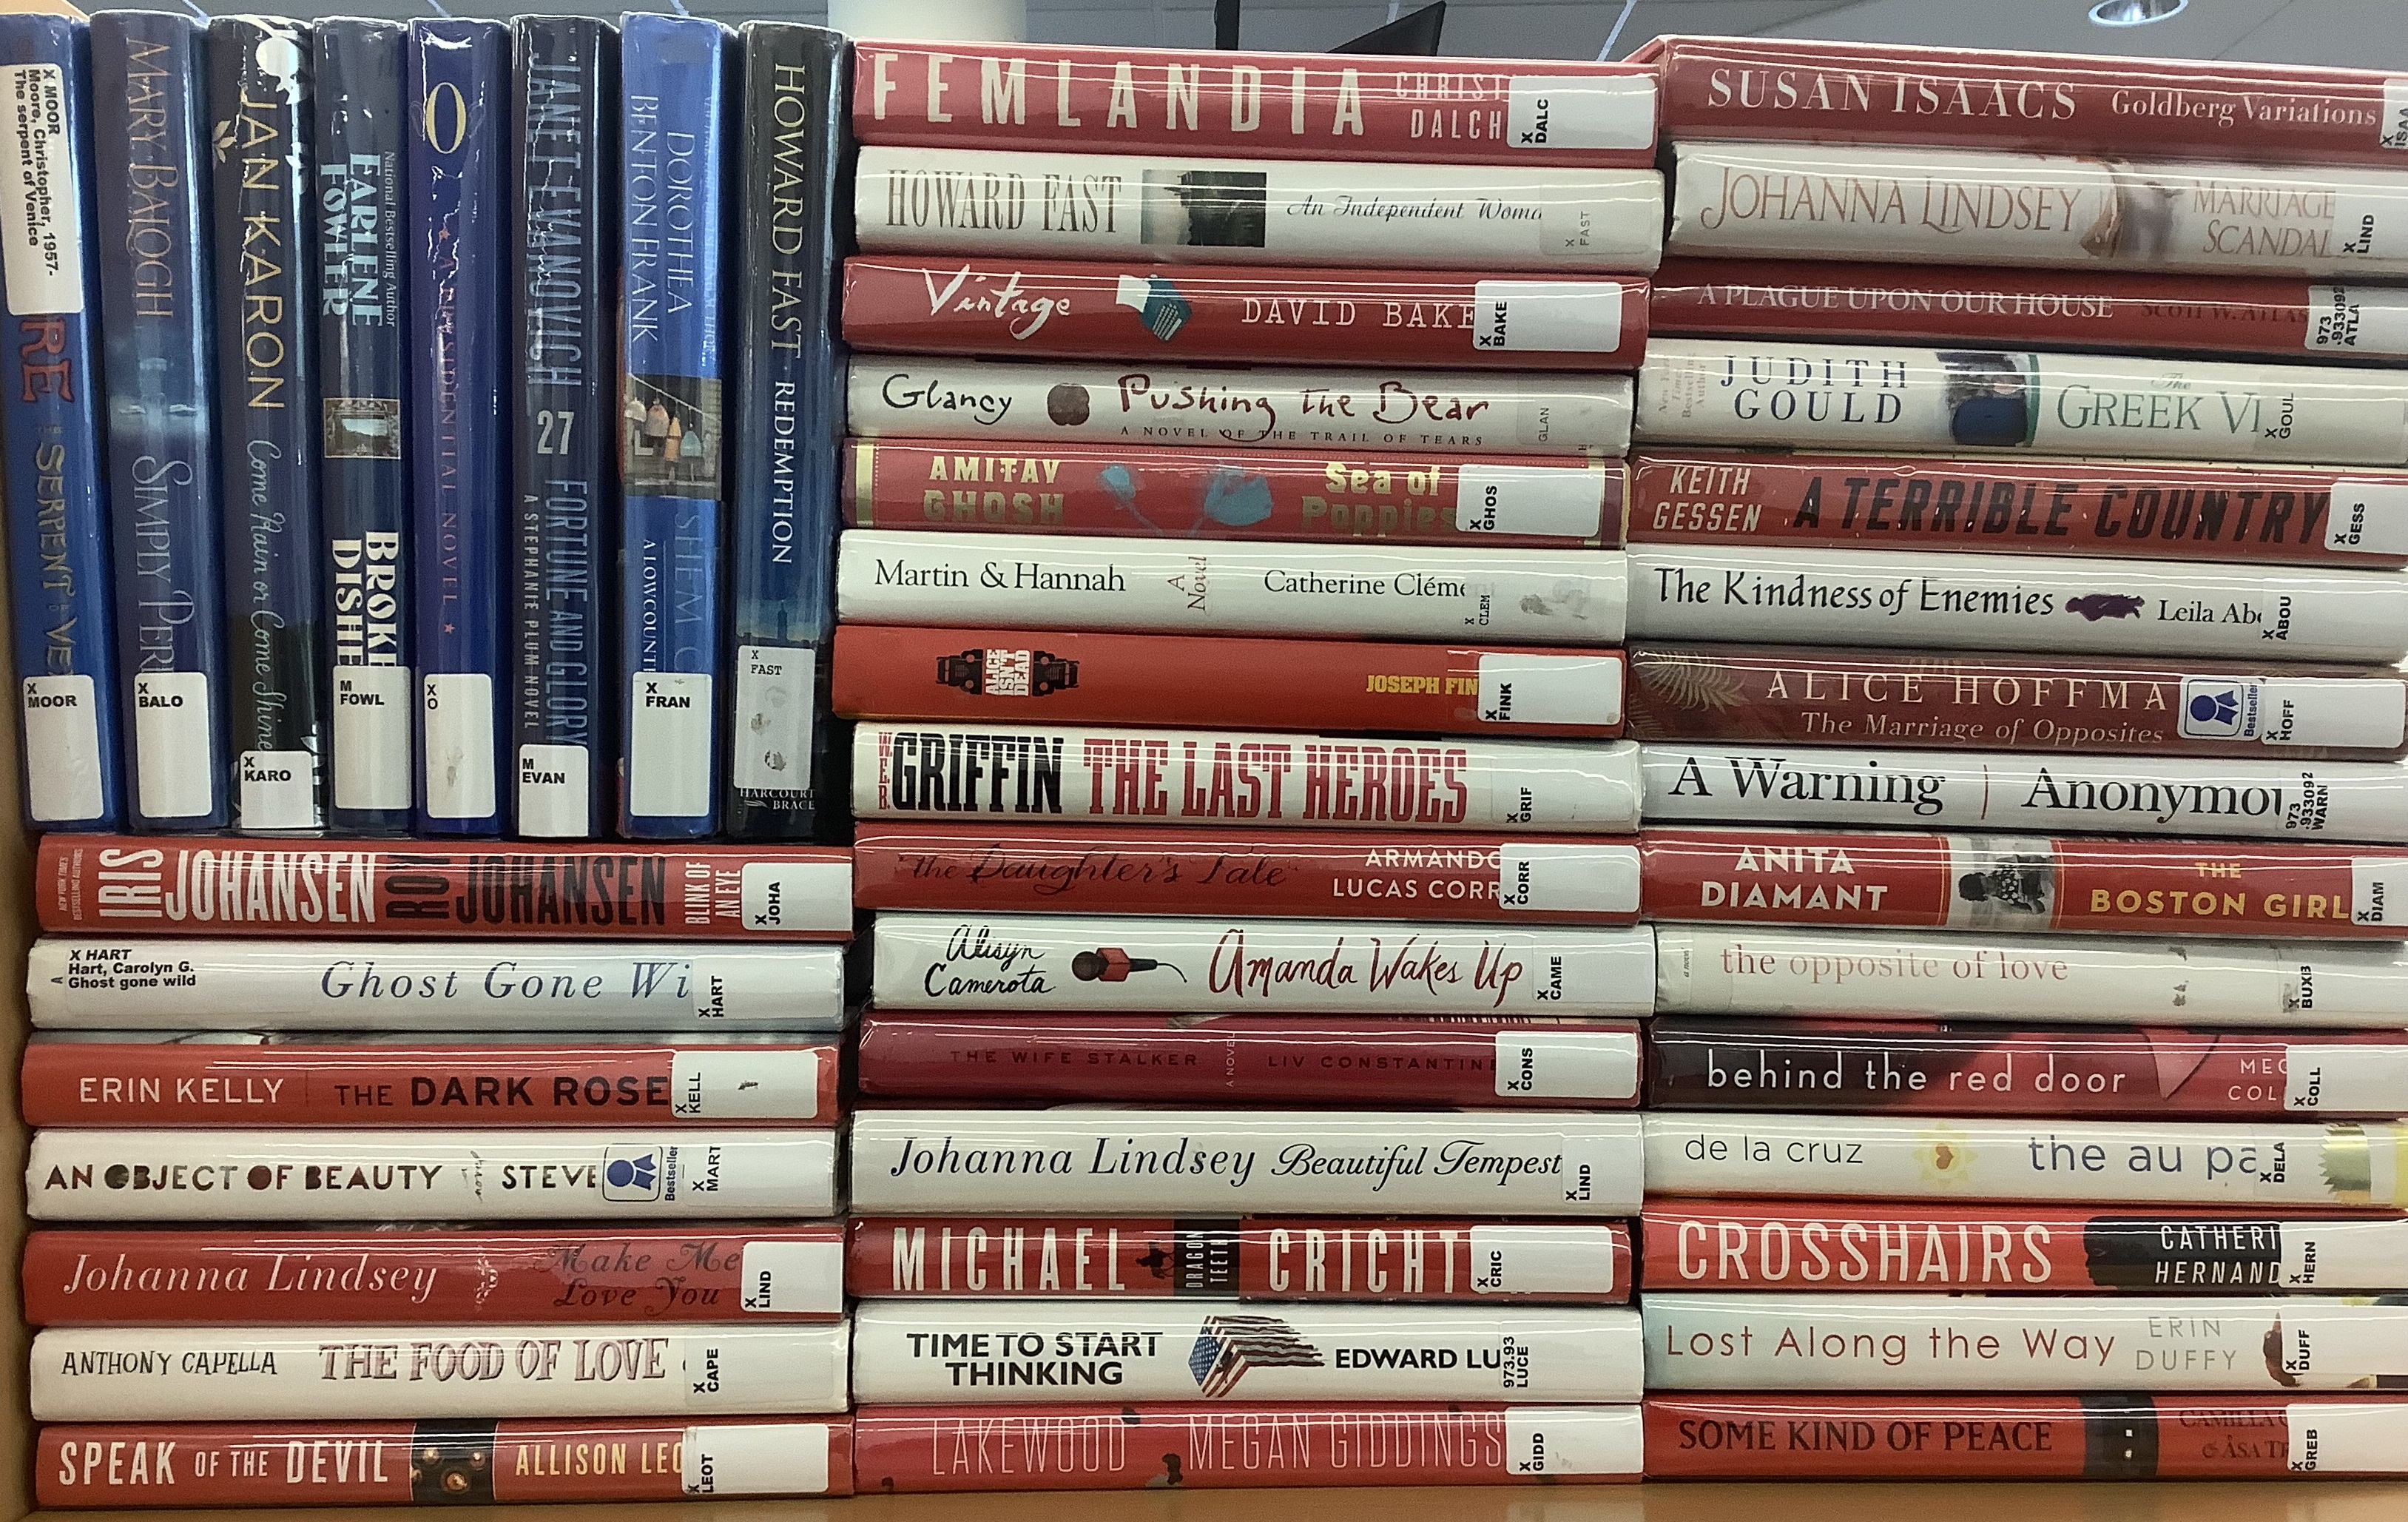 An American flag made out of red white and blue book spines